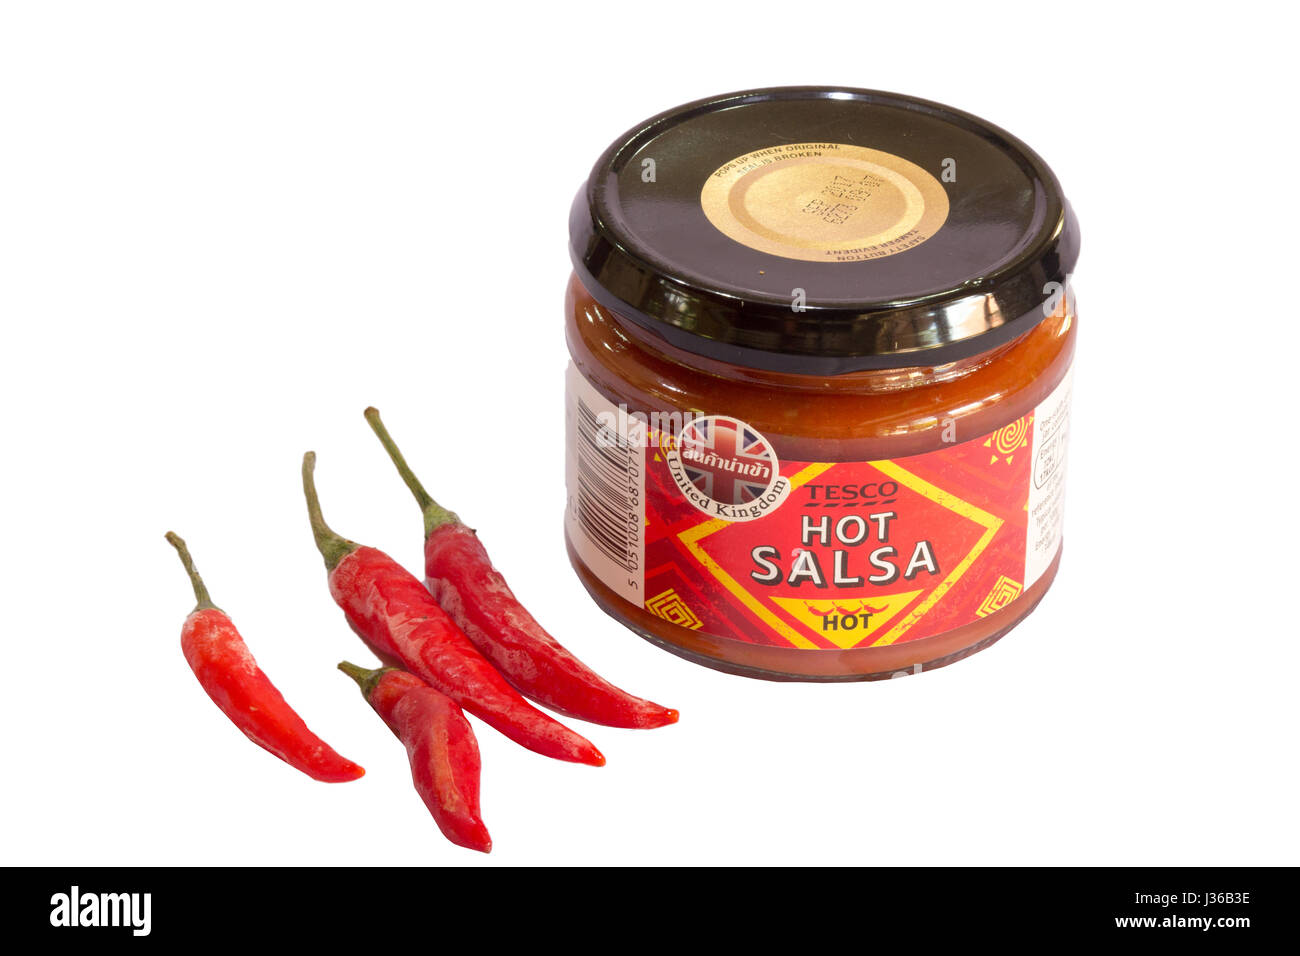 Tesco hot salsa in a jar with red, hot chillies Stock Photo